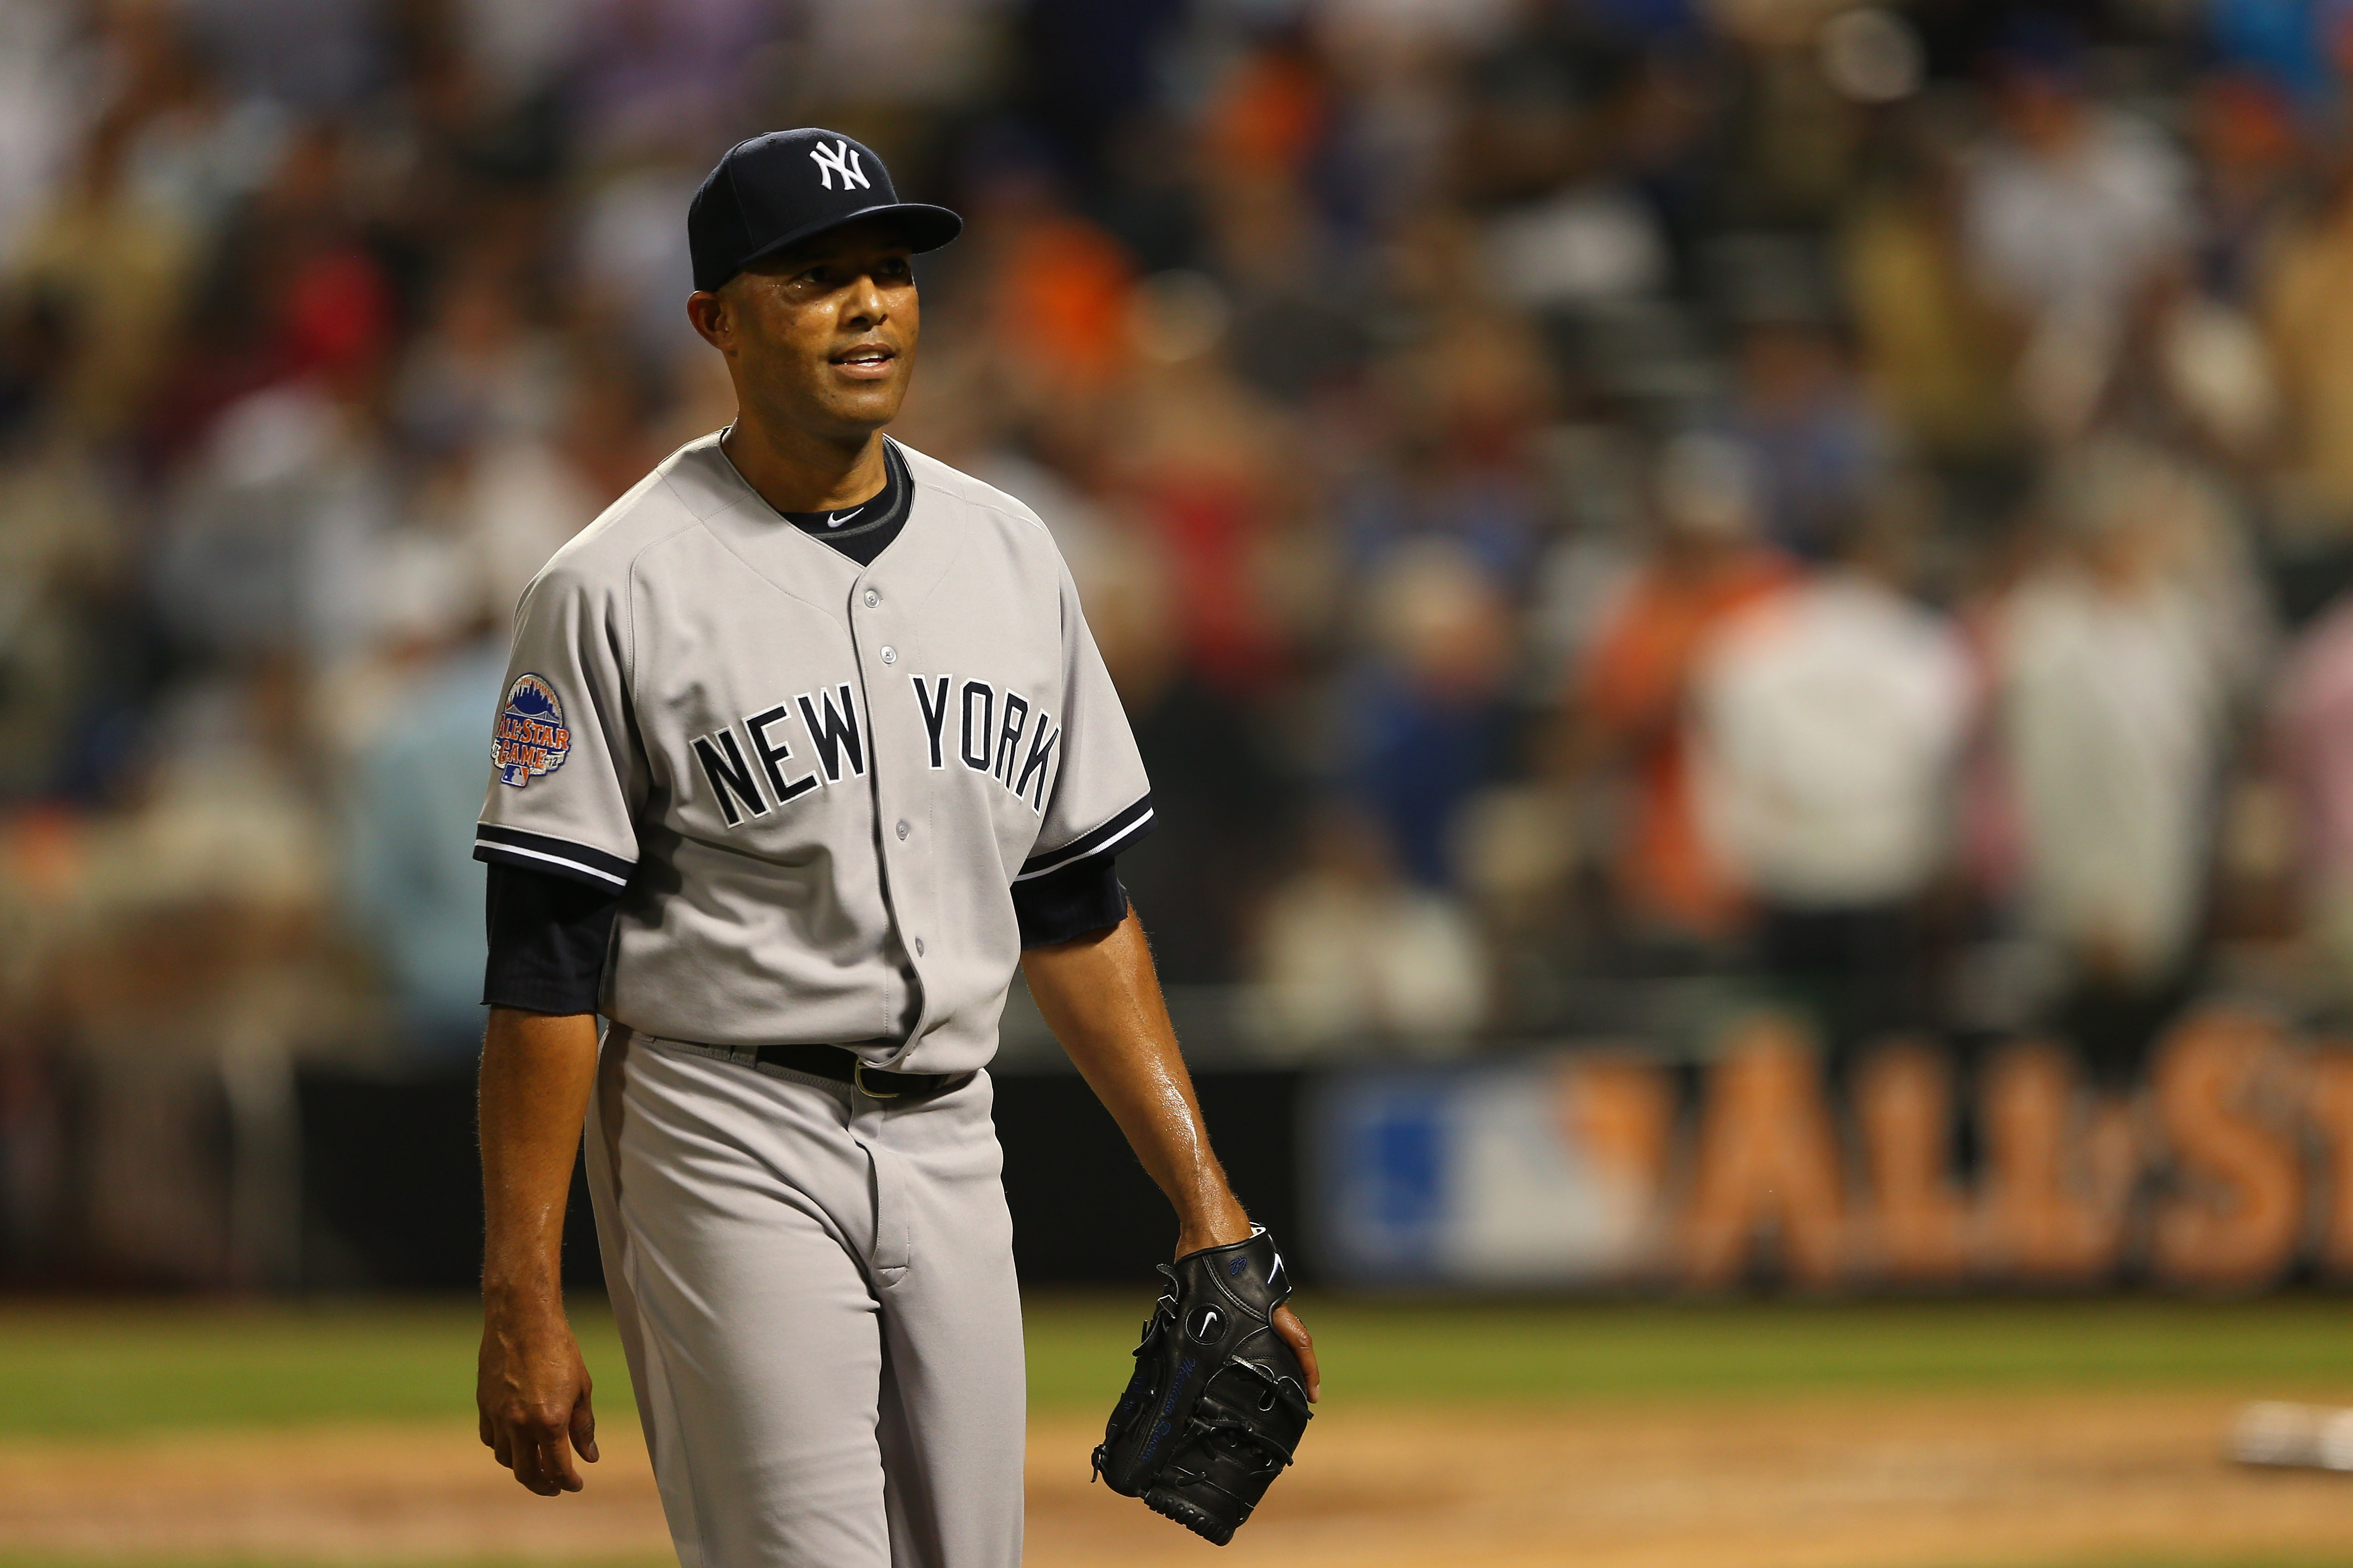 Fraley: Anchored by one devastating pitch, Mariano Rivera's career